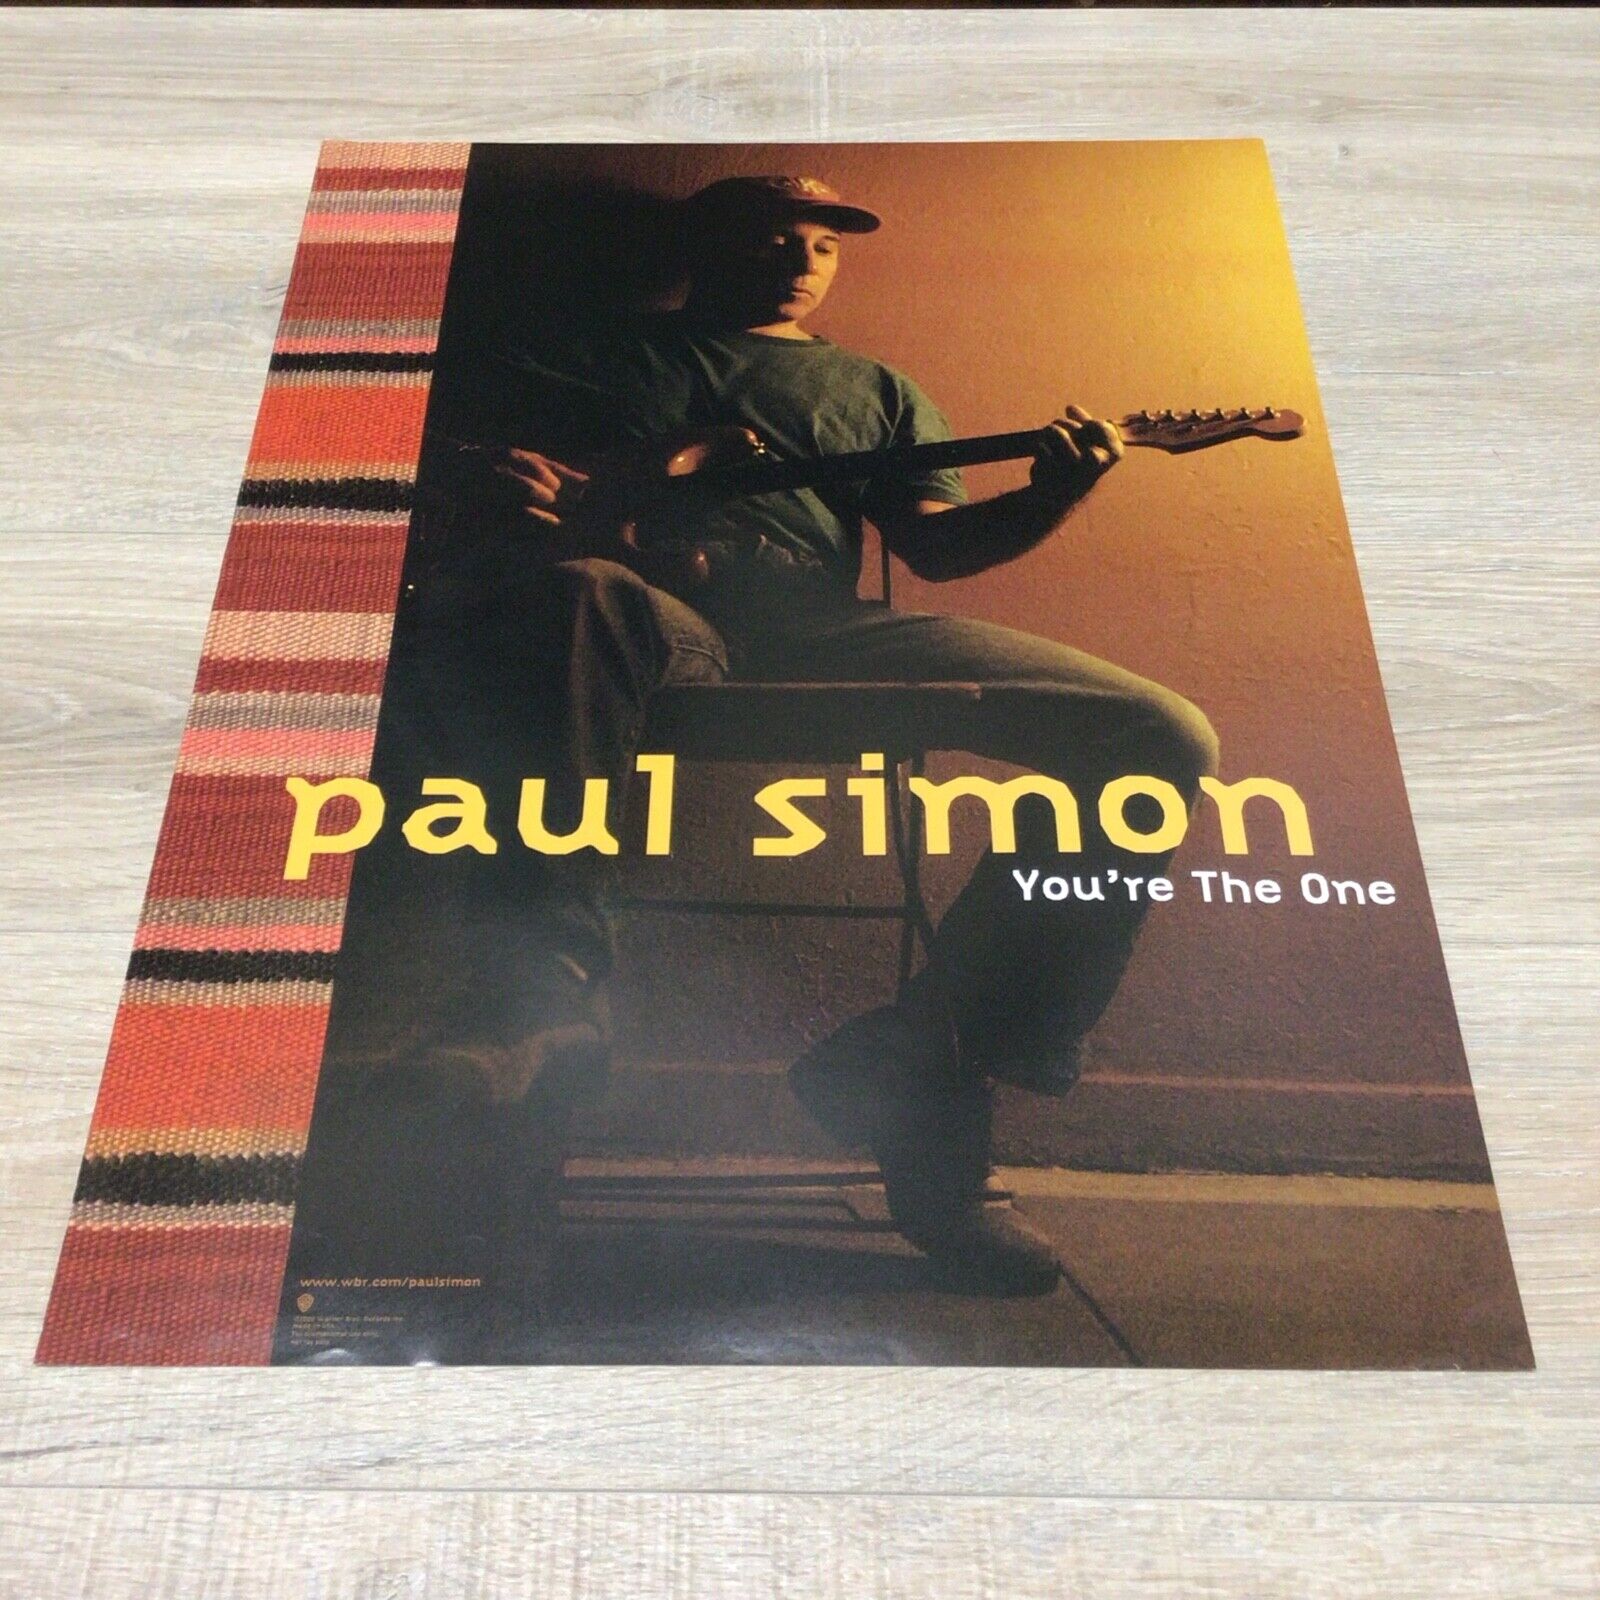 Paul Simon You're The One 2000 Promo Poster 18" X 24"